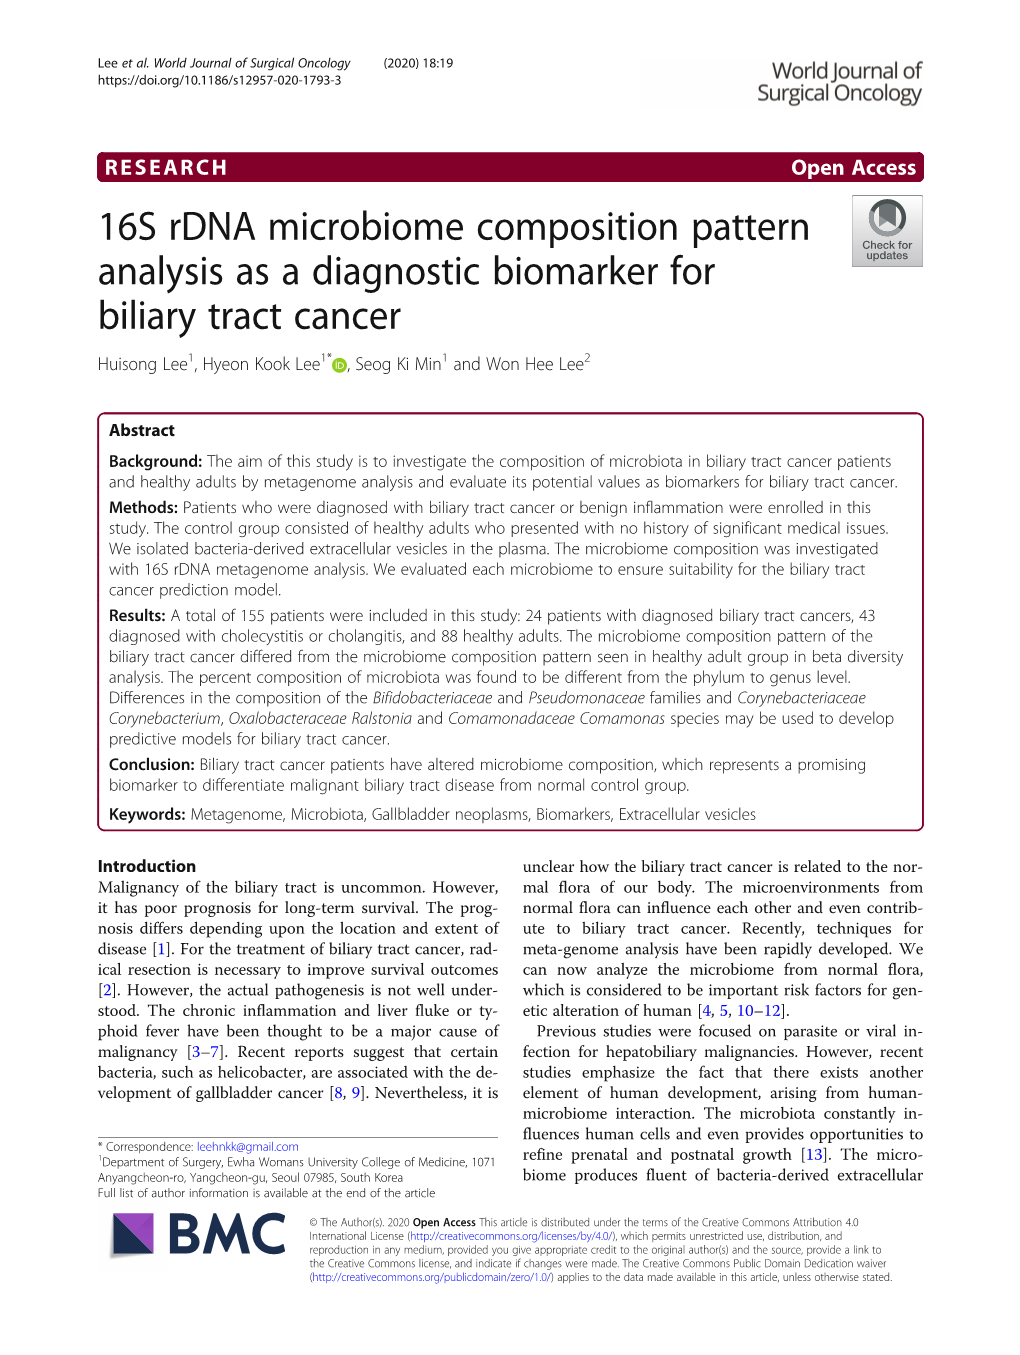 16S Rdna Microbiome Composition Pattern Analysis As a Diagnostic Biomarker for Biliary Tract Cancer Huisong Lee1, Hyeon Kook Lee1* , Seog Ki Min1 and Won Hee Lee2